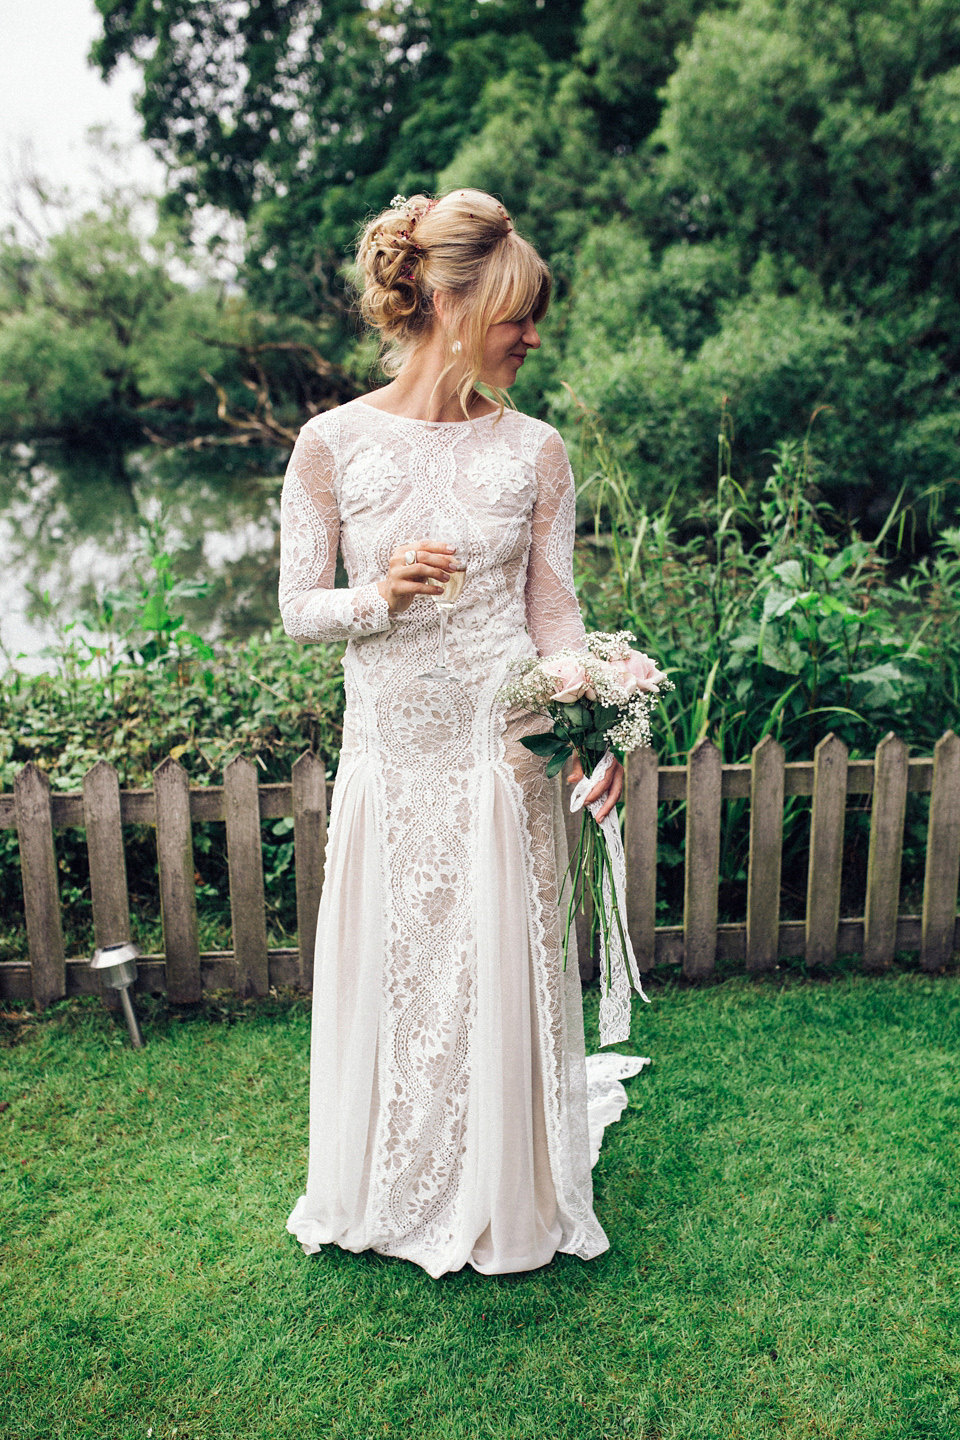 A 1960s inspired Grace Loves Lace Bride for a Relaxed Outdoor Humanist Pub Wedding. Photography by Corrado Chiozzi.